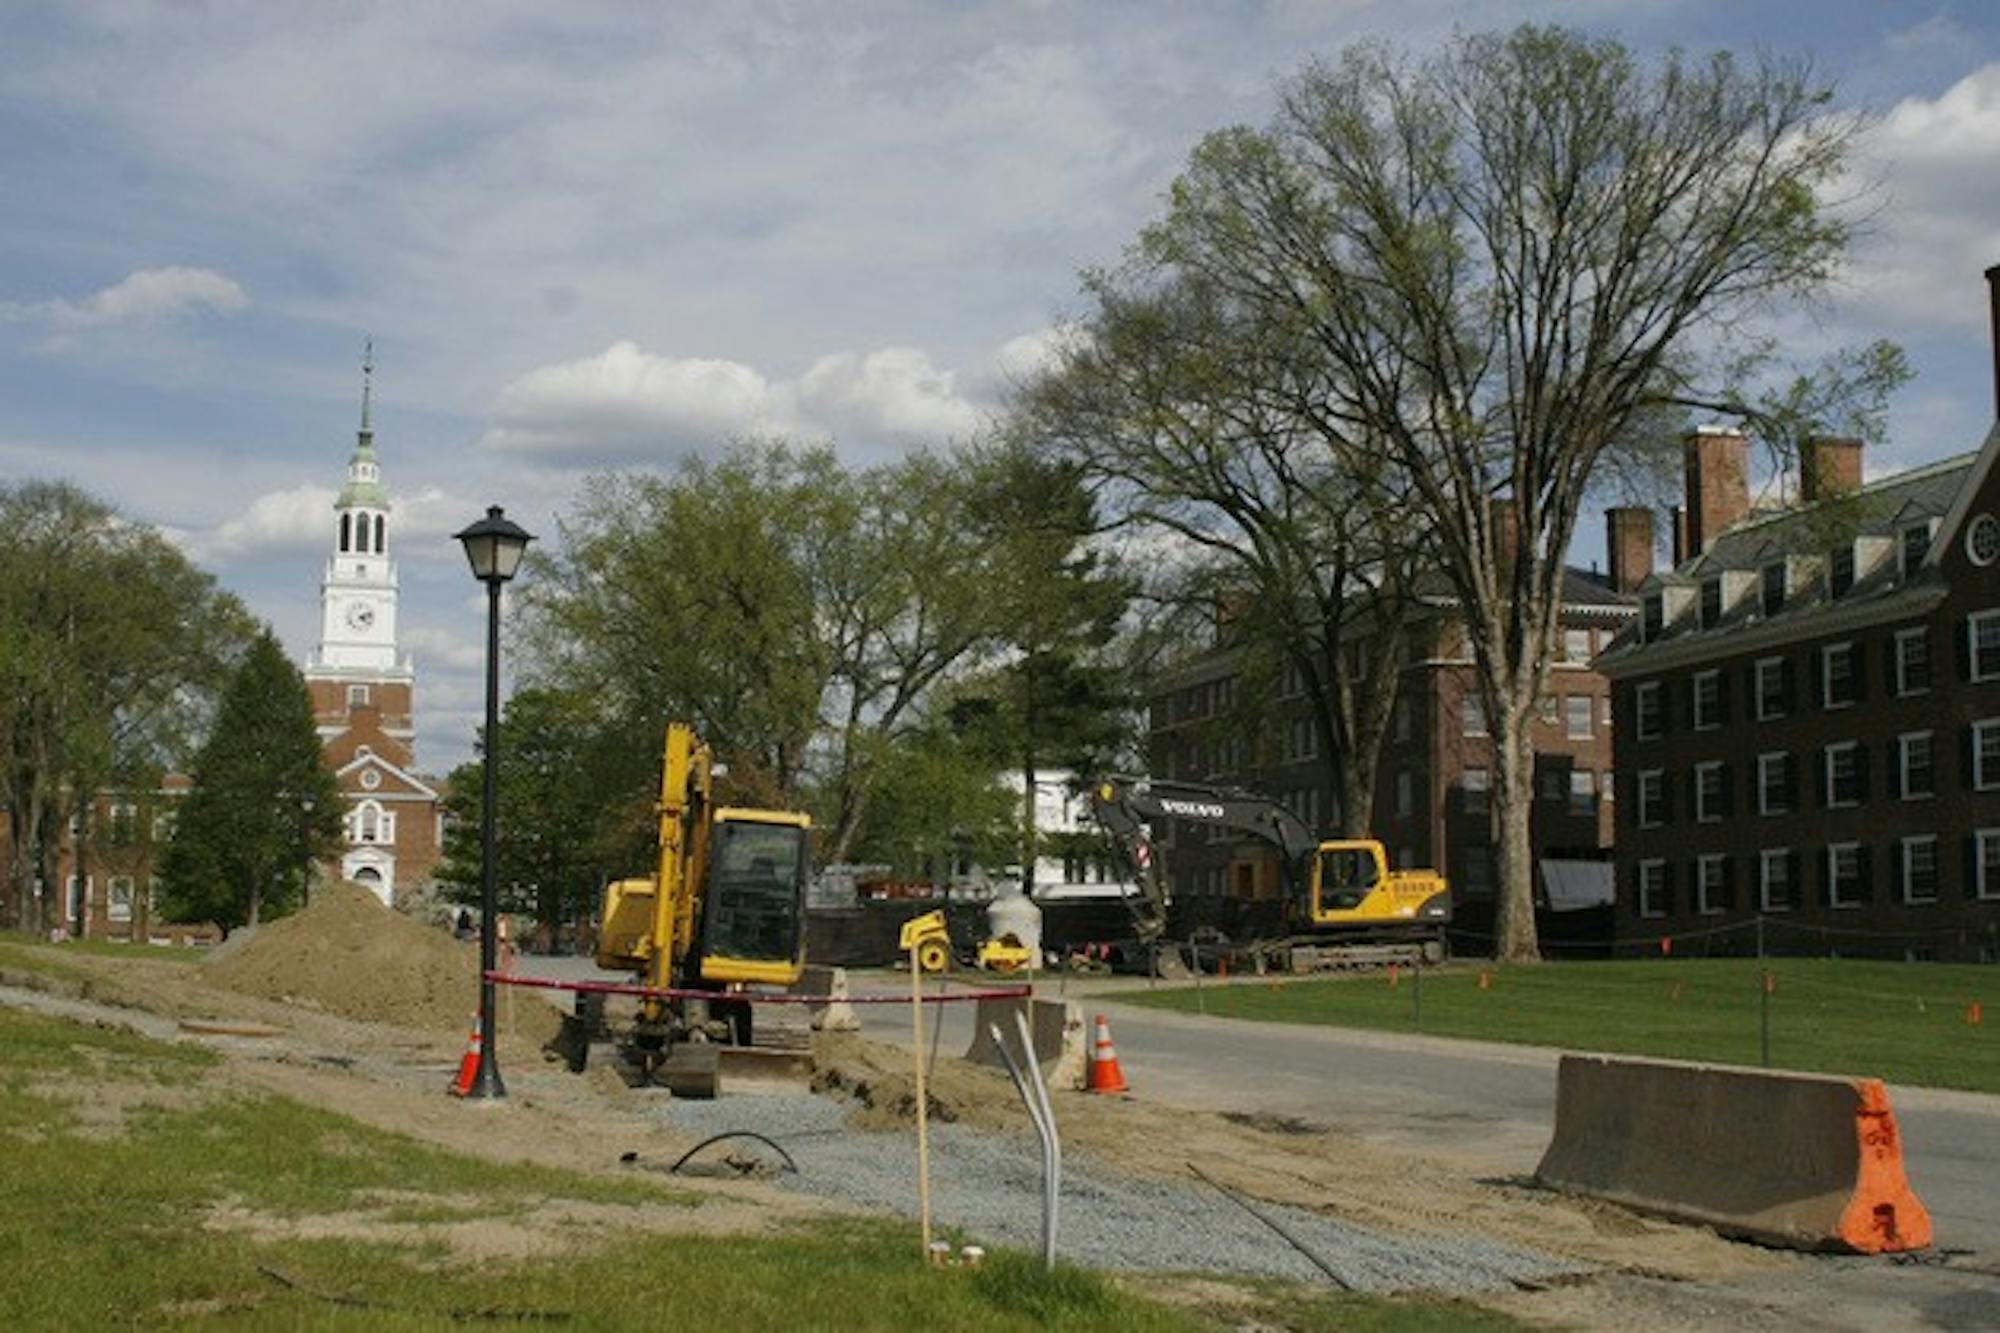 Construction of Tuck Drive will continue this spring as one of three ongoing building projects on the street.